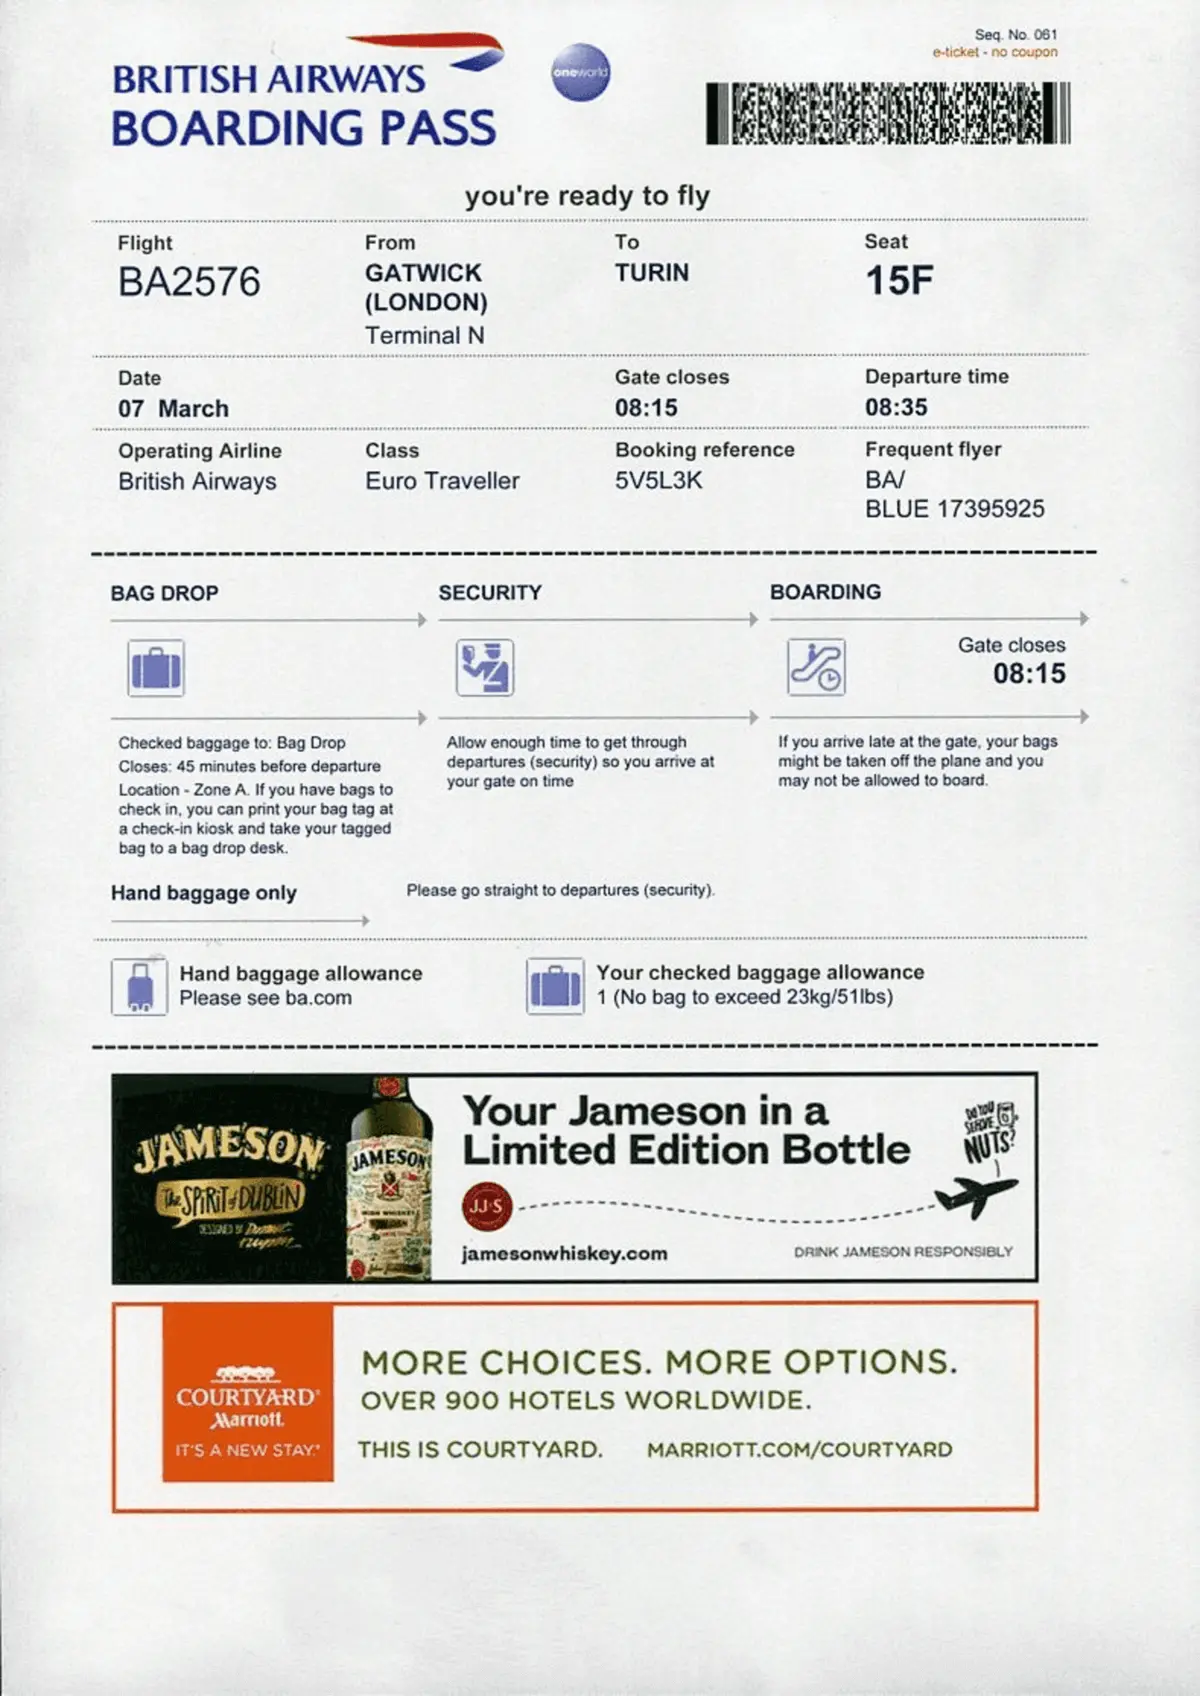 Baltimore Airport Bwi Advertising Boarding Passes A1